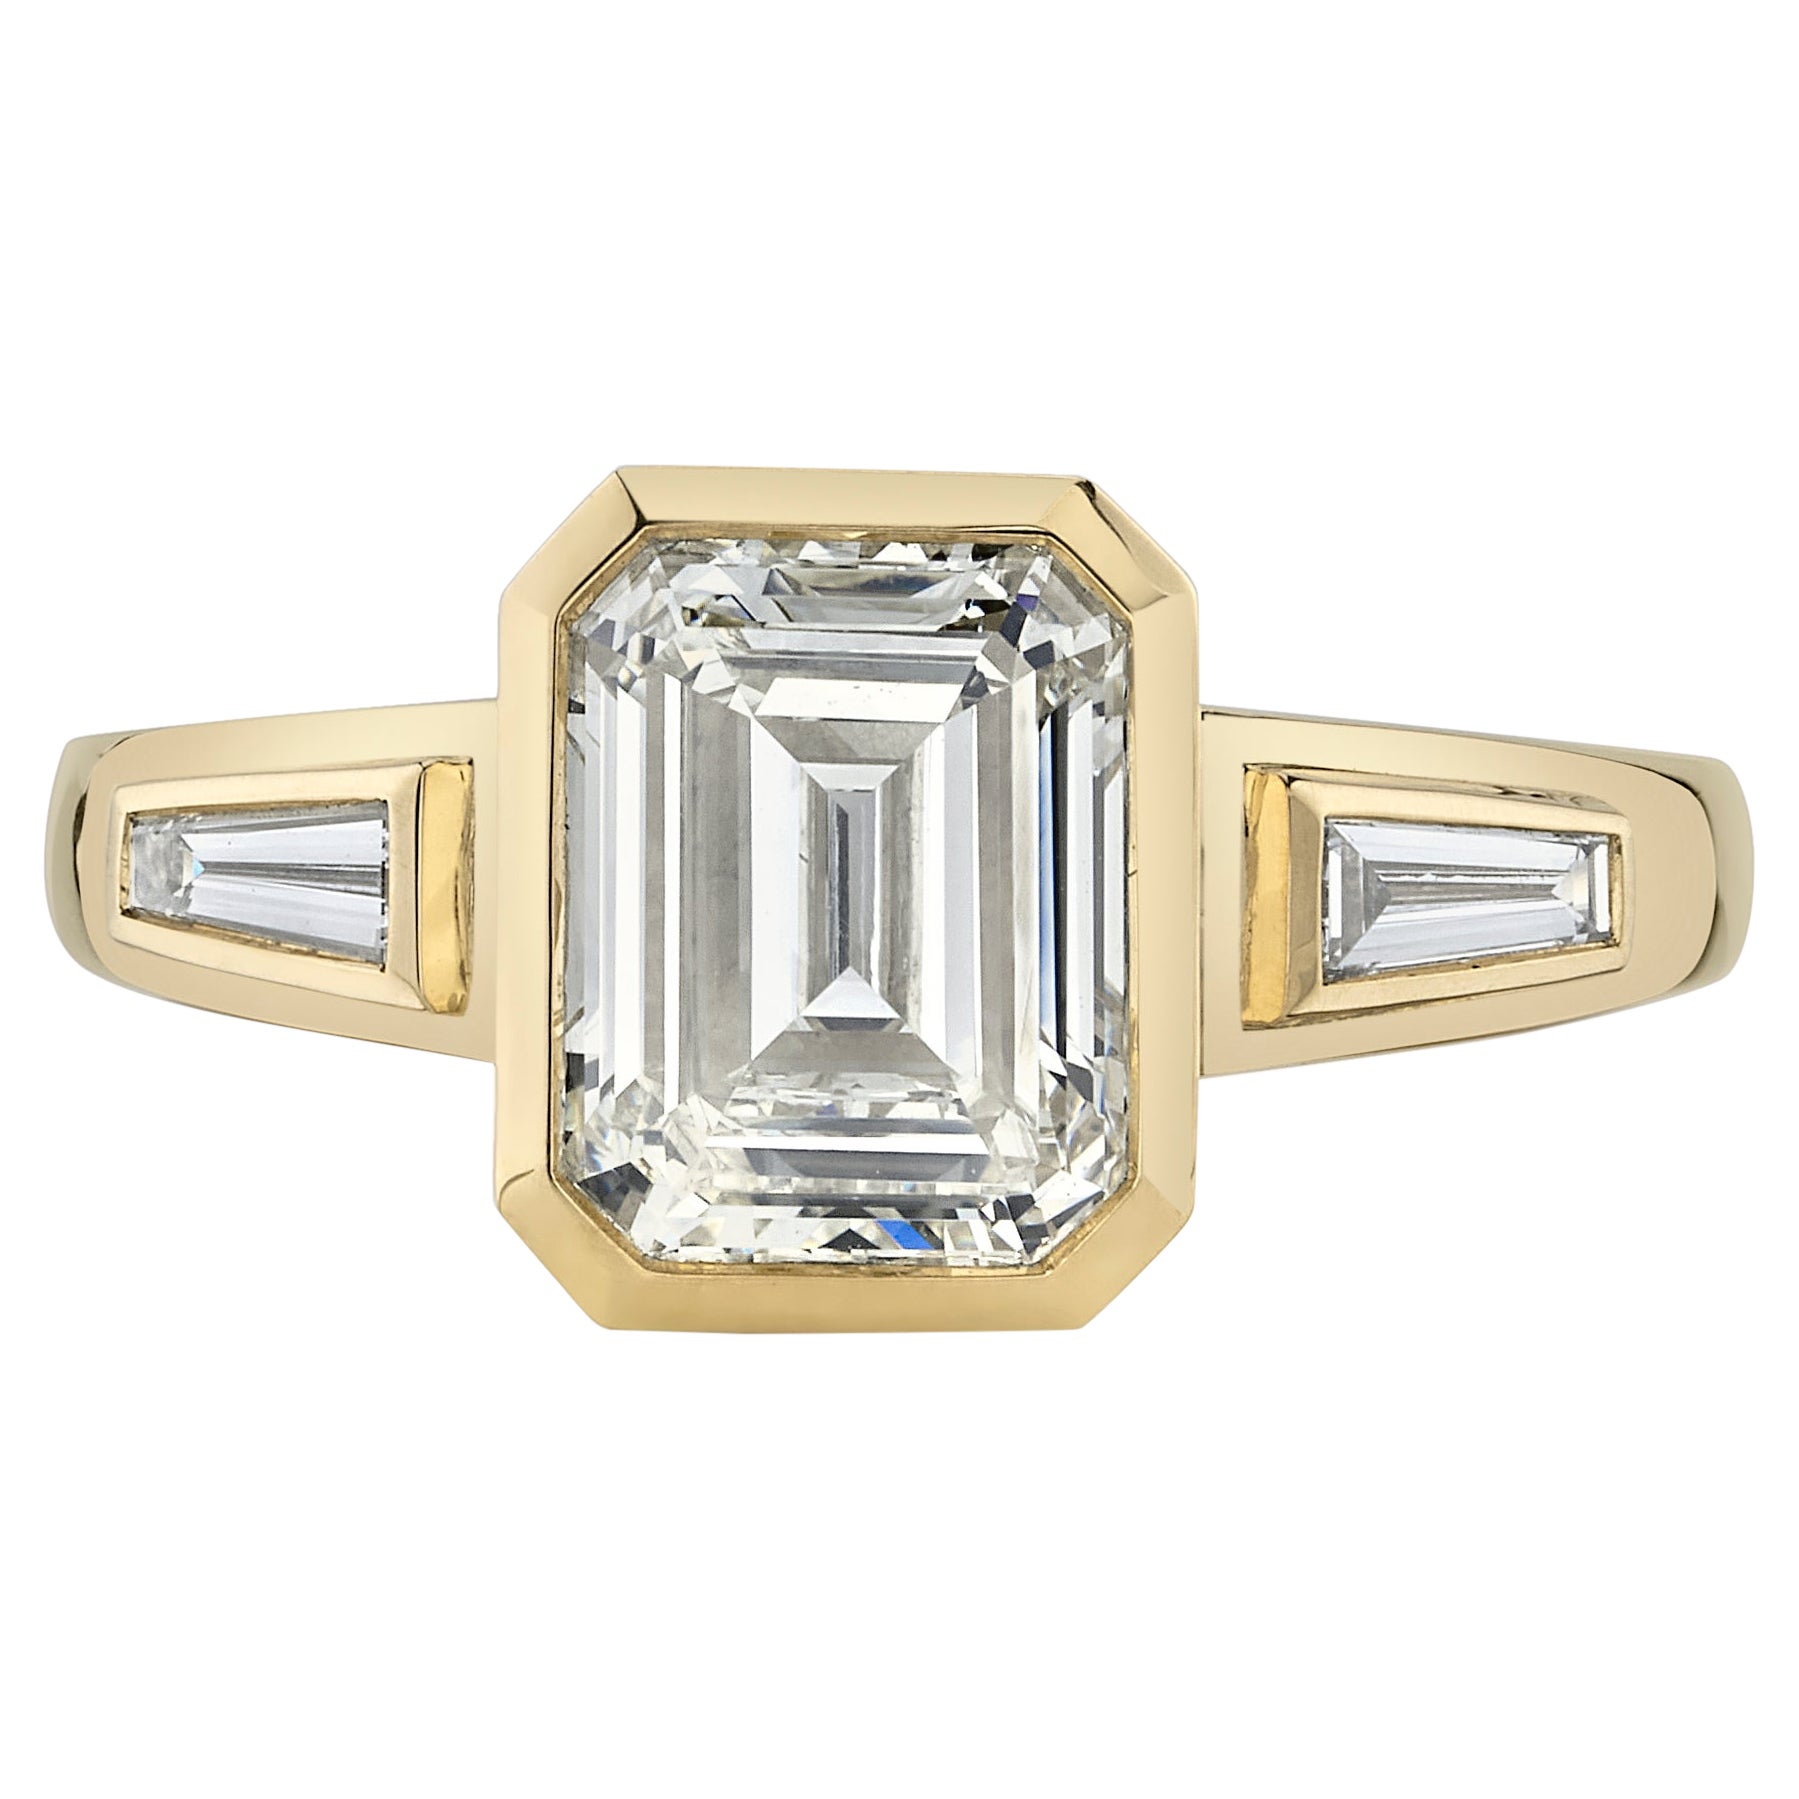 Handcrafted Laurie Emerald Cut Diamond Ring by Single Stone For Sale